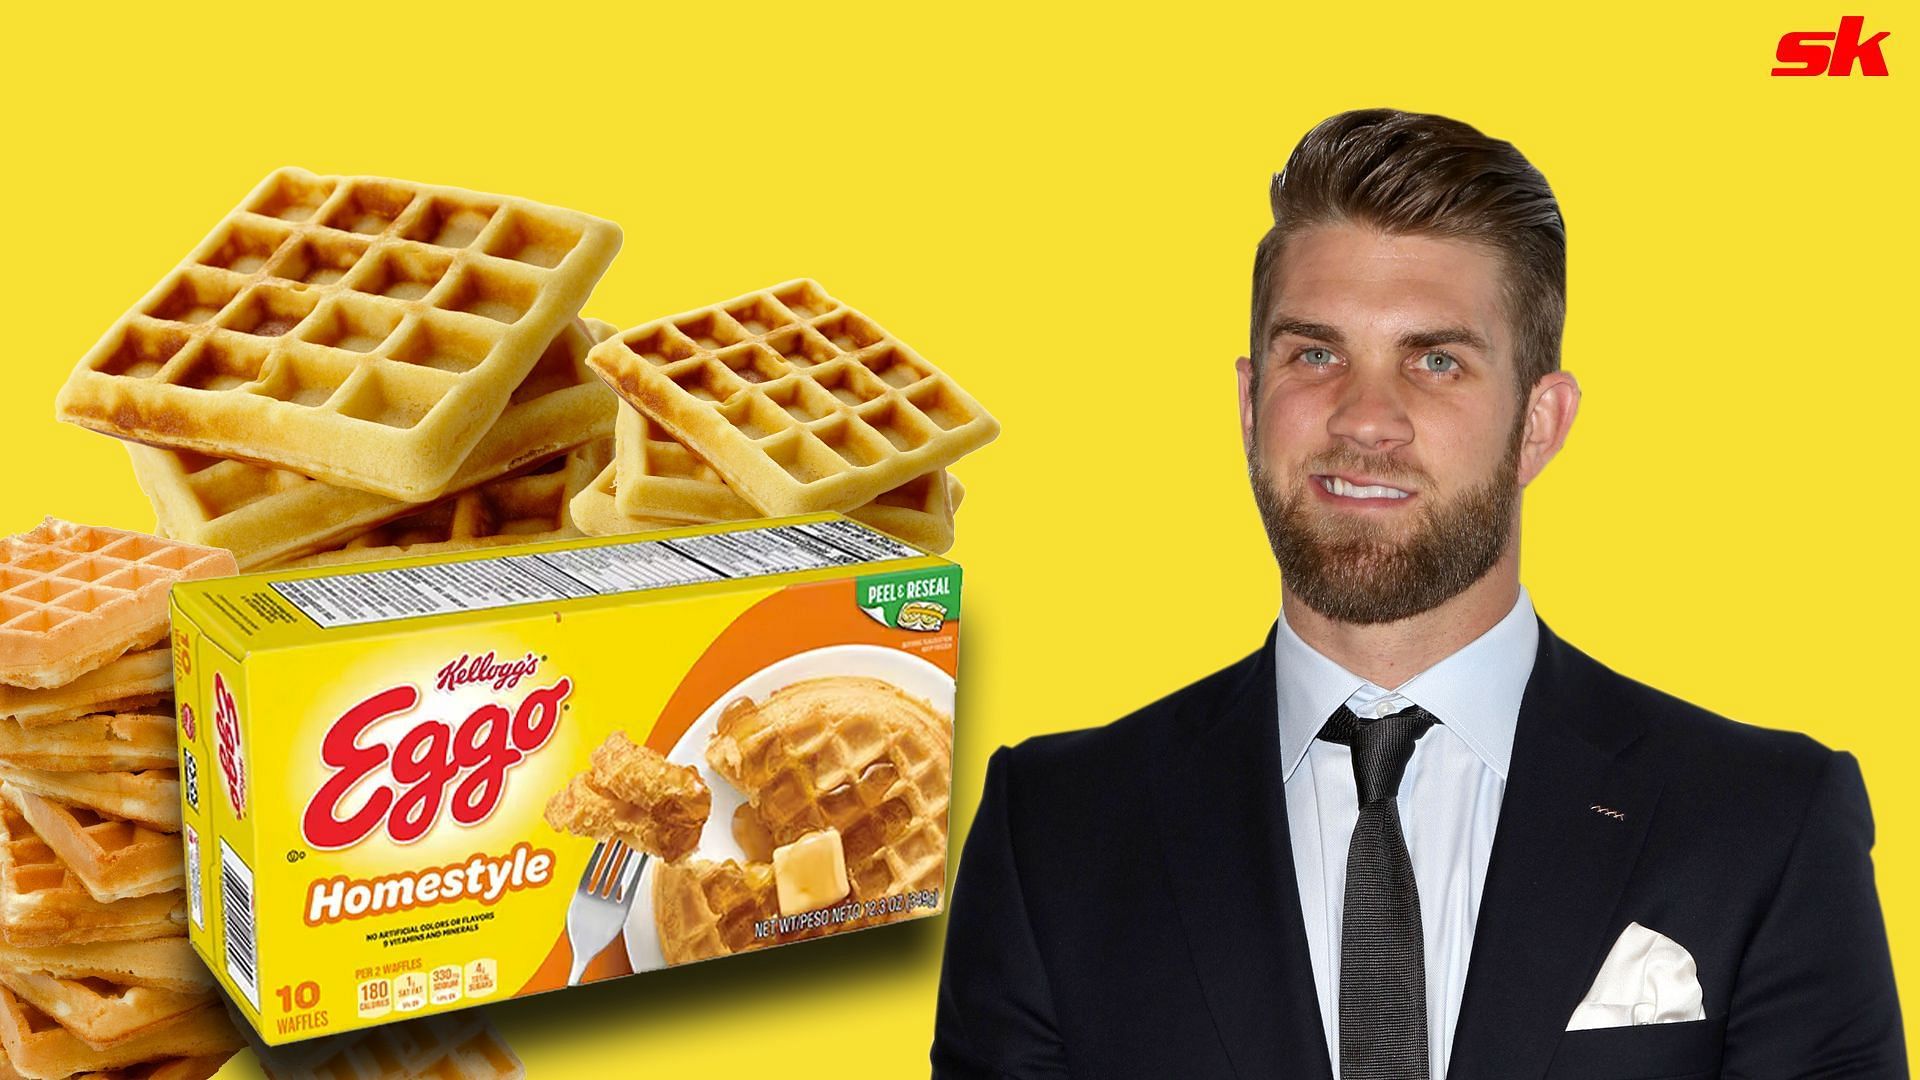 Bryce Harper likes his Eggos before the game